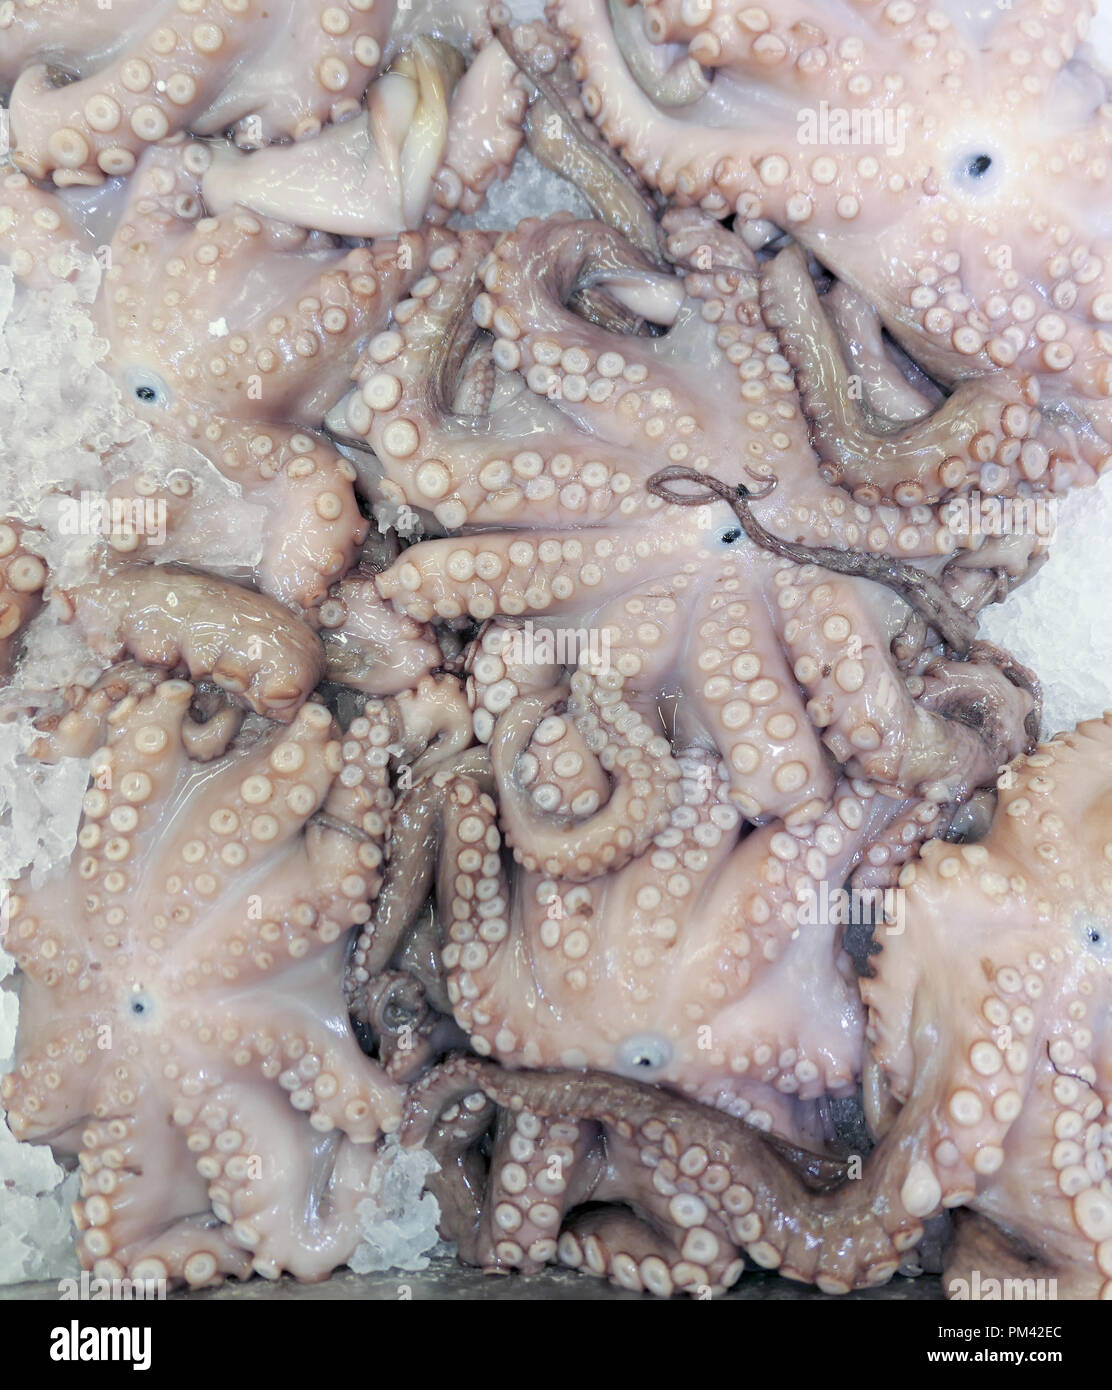 Fresh octopuses at a market Stock Photo